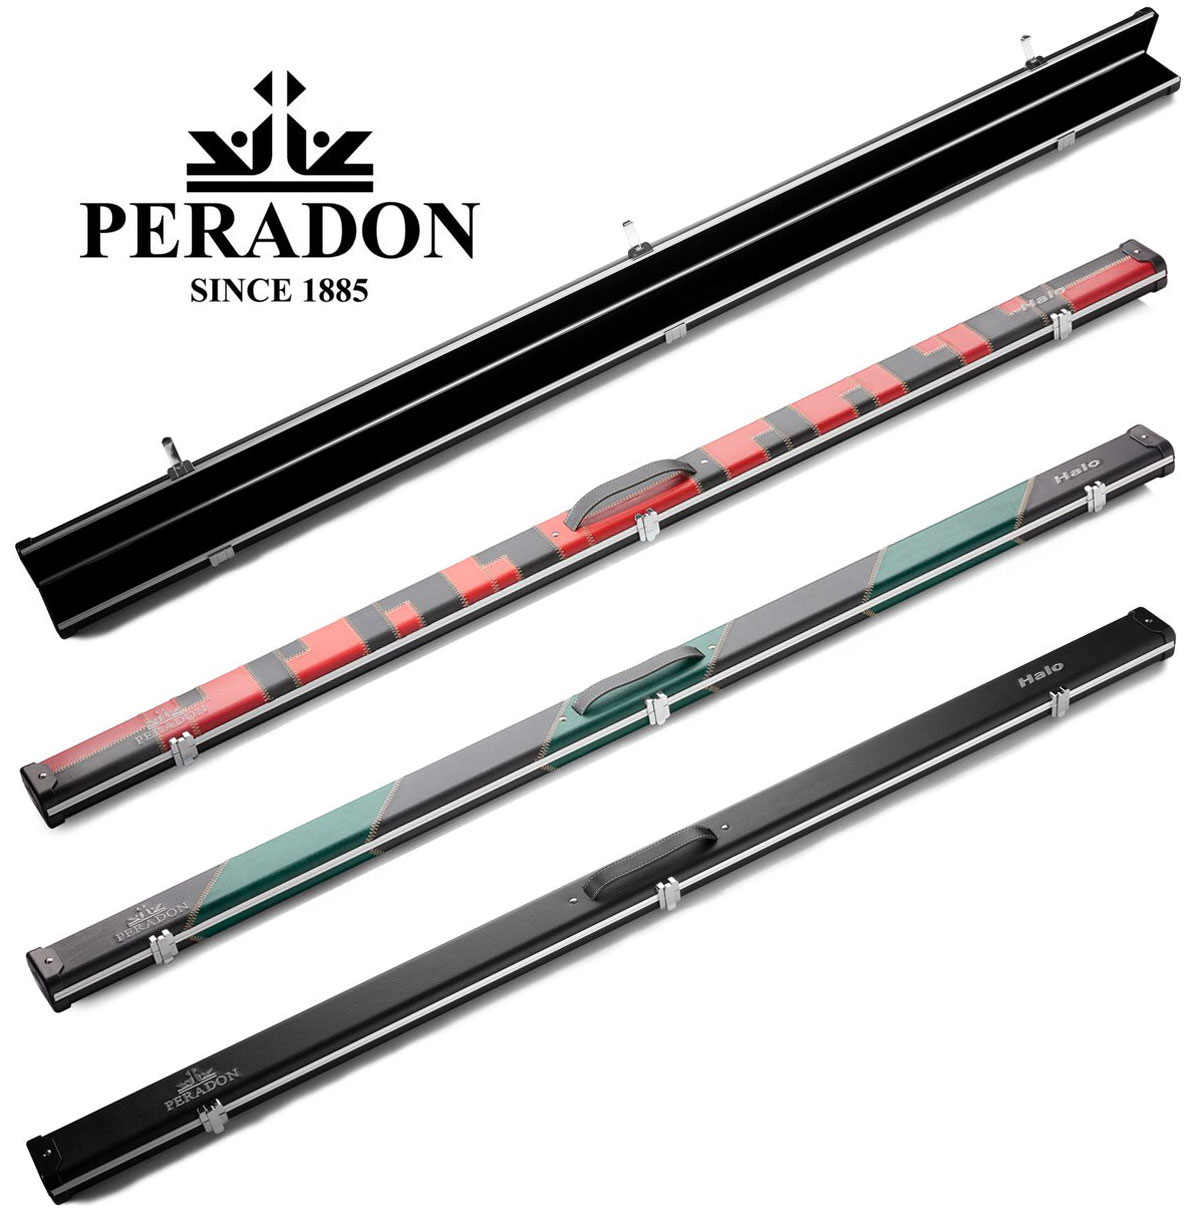 1pc Peradon Leather Snooker cue case// Pool cue case Black leather to hold 2 cues